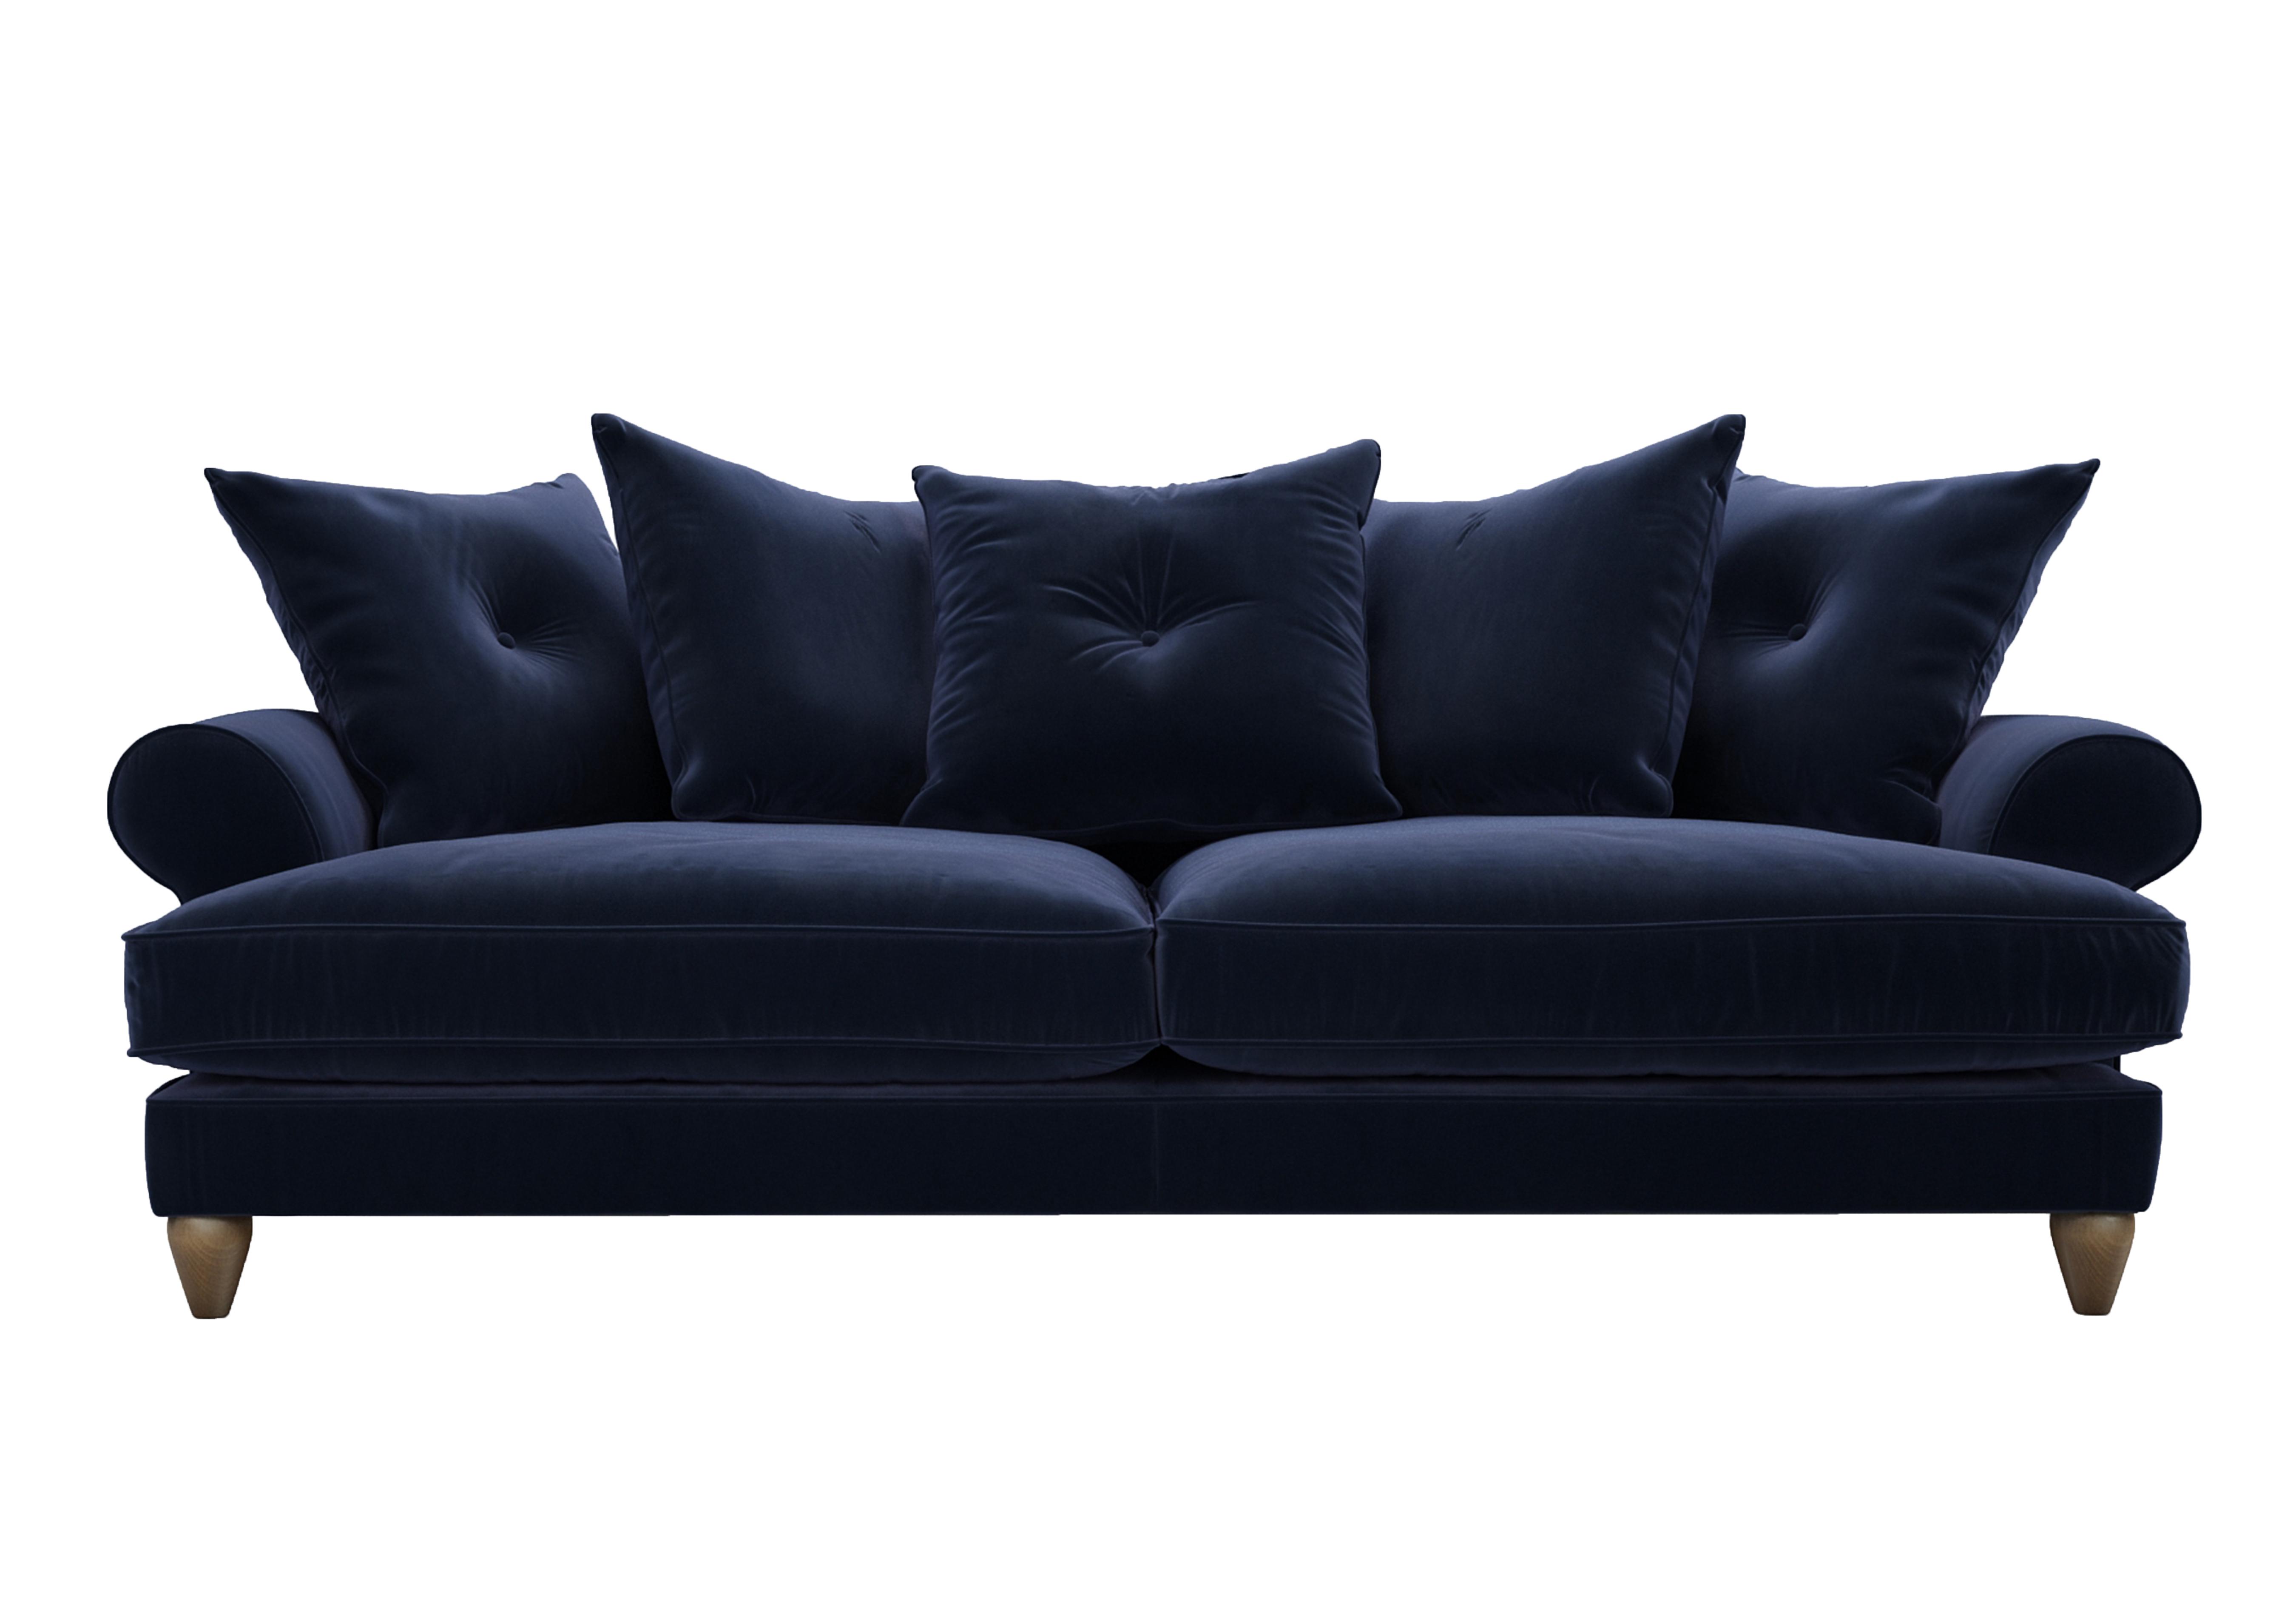 Bronwyn 4 Seater Fabric Scatter Back Sofa in Mid009 Midnight Indigo on Furniture Village